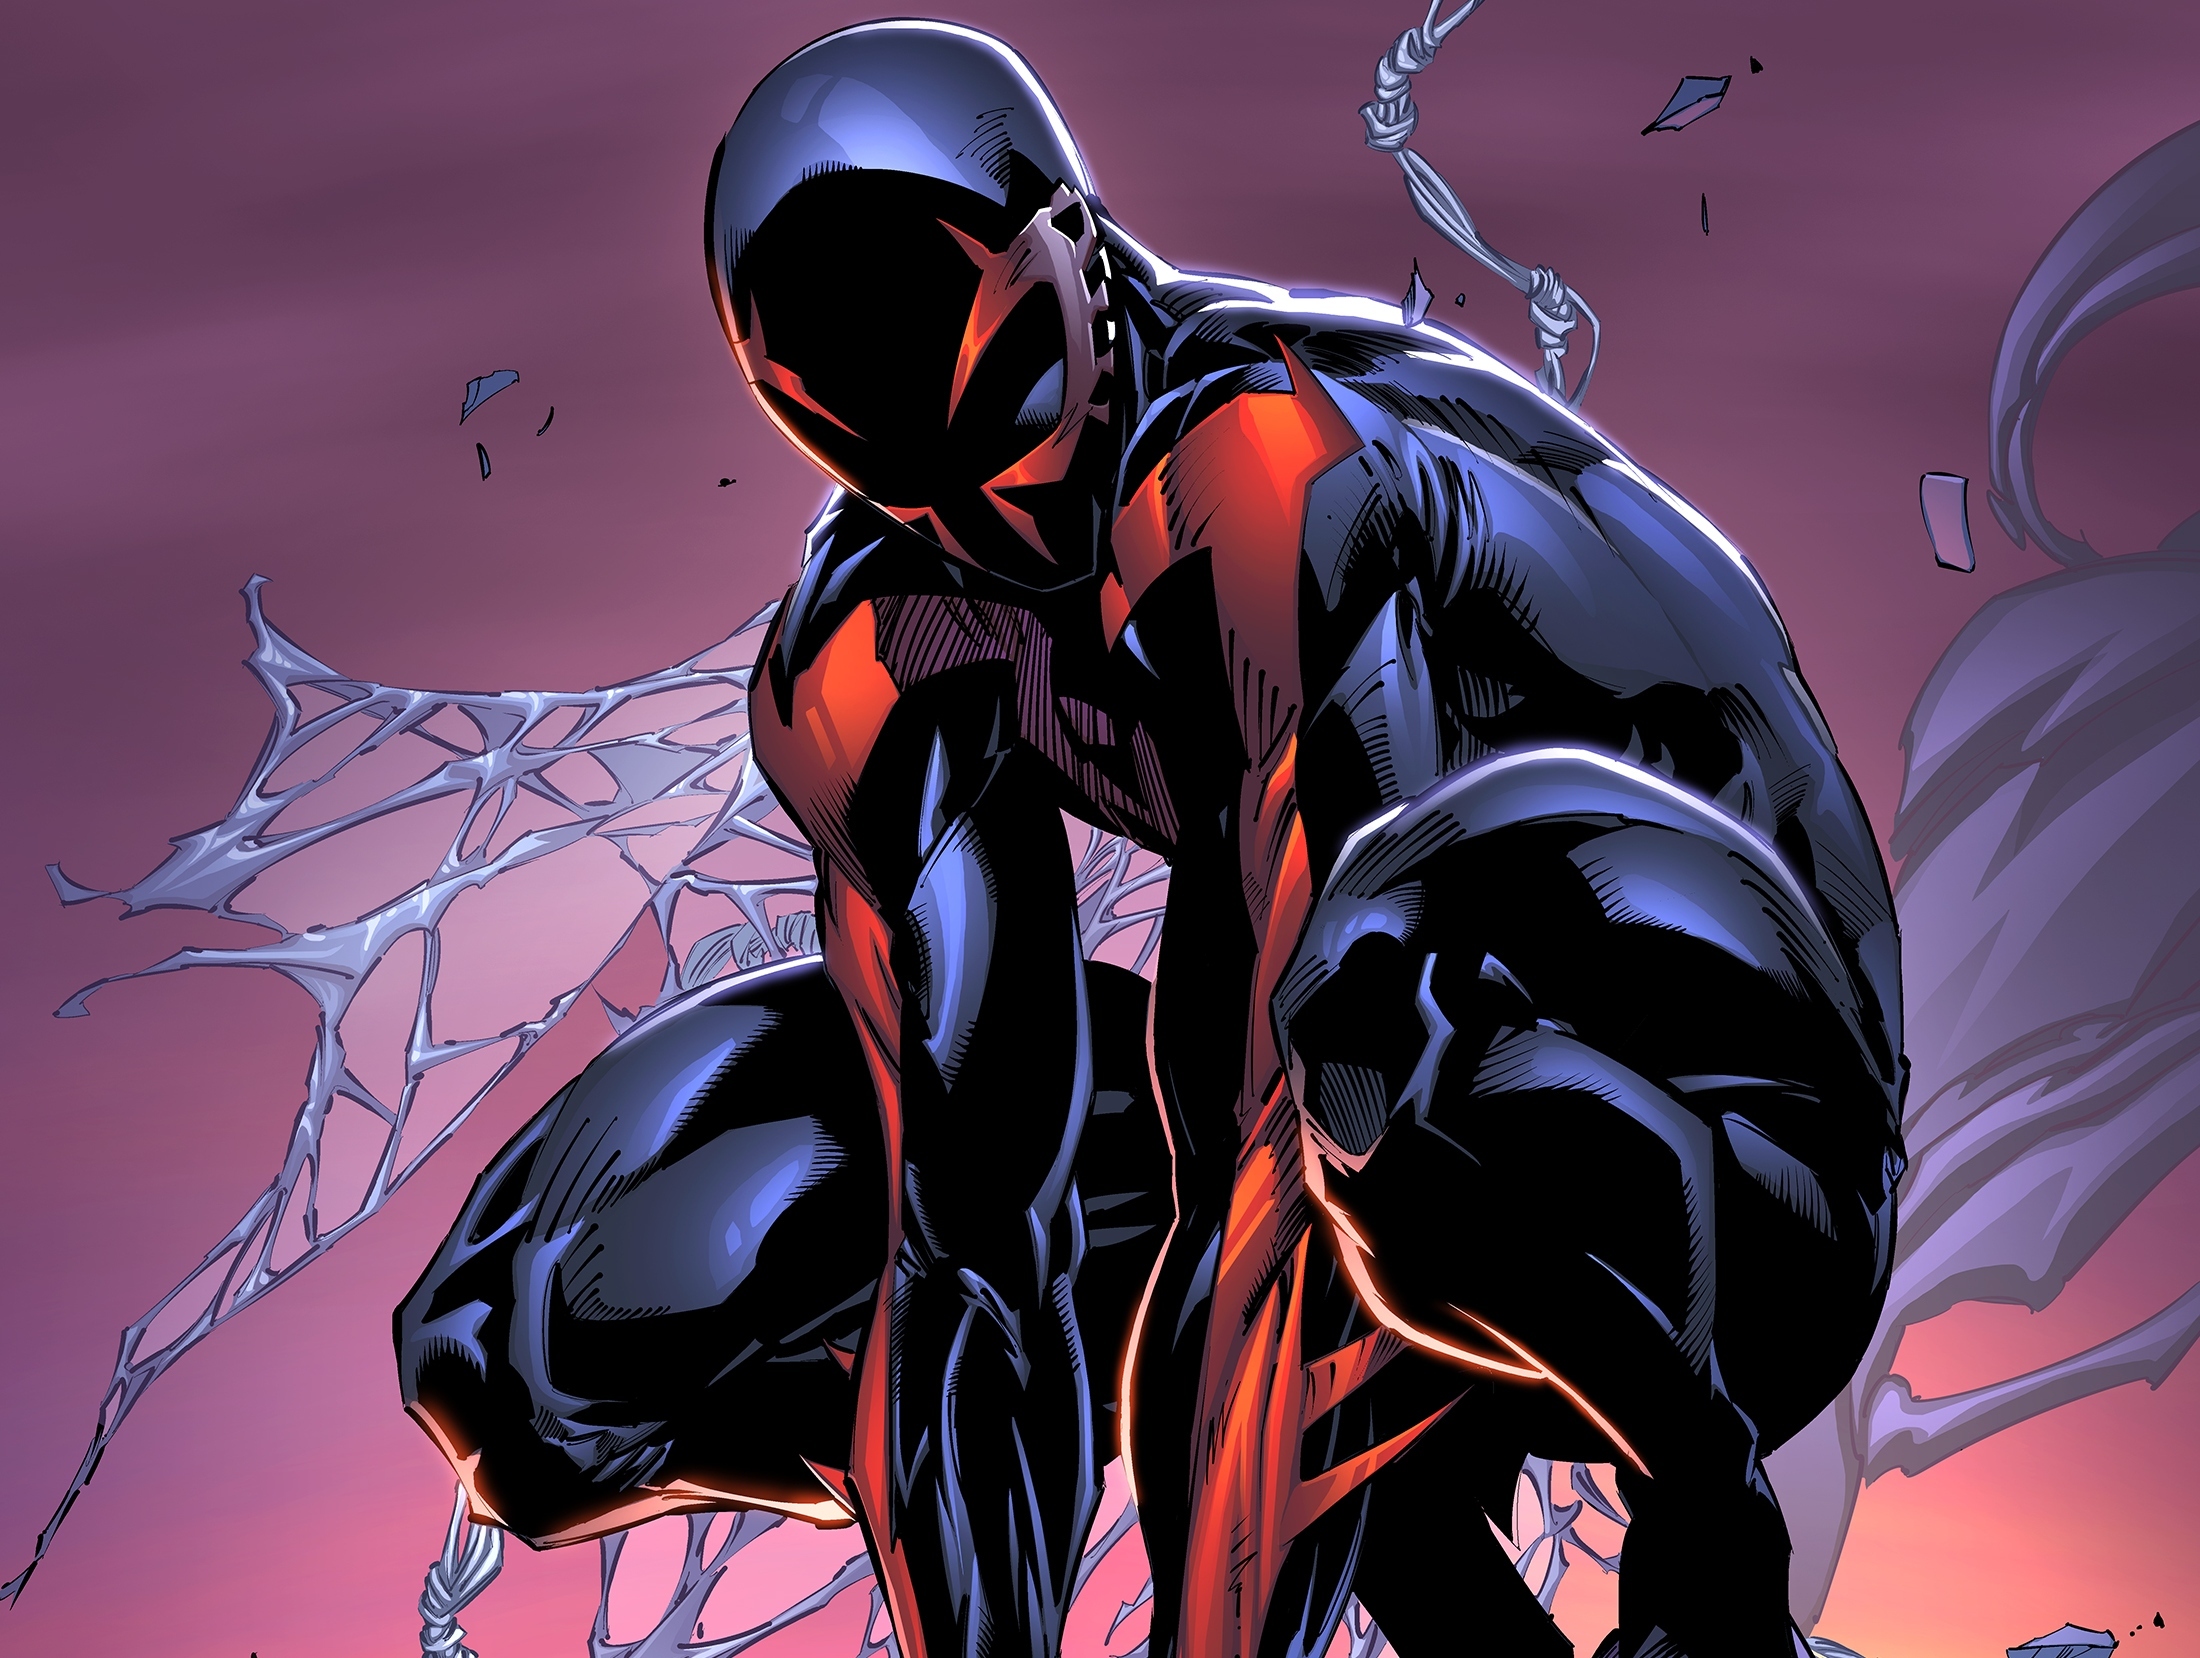 Who is Spider-Man 2099